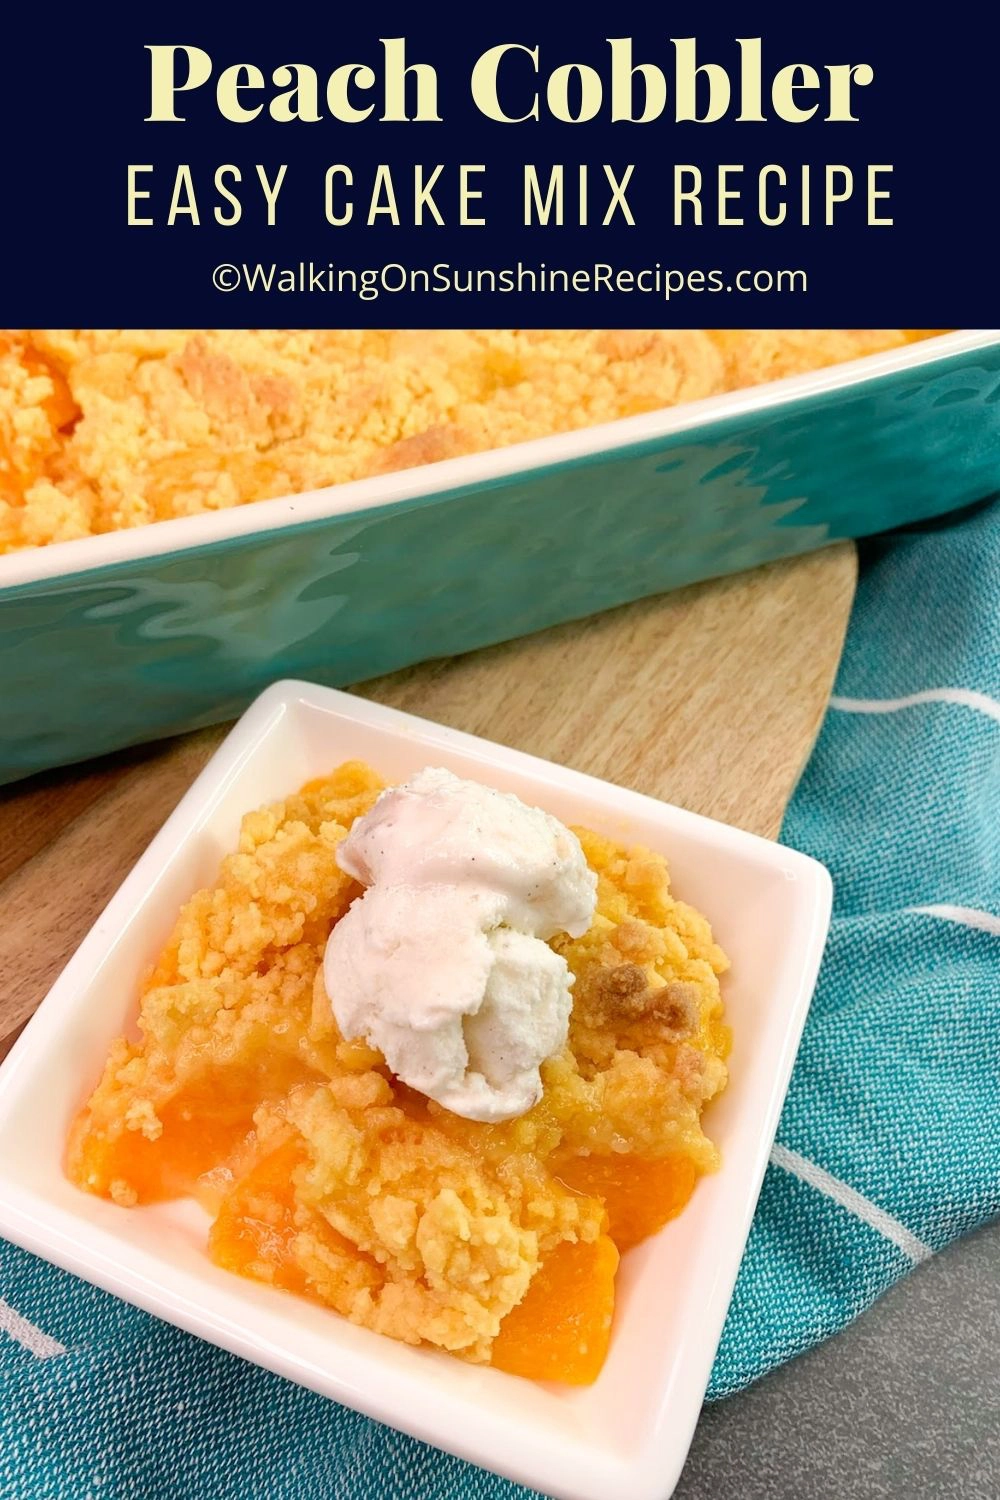 Cake Mix Crumb Topping over Canned Peaches. 